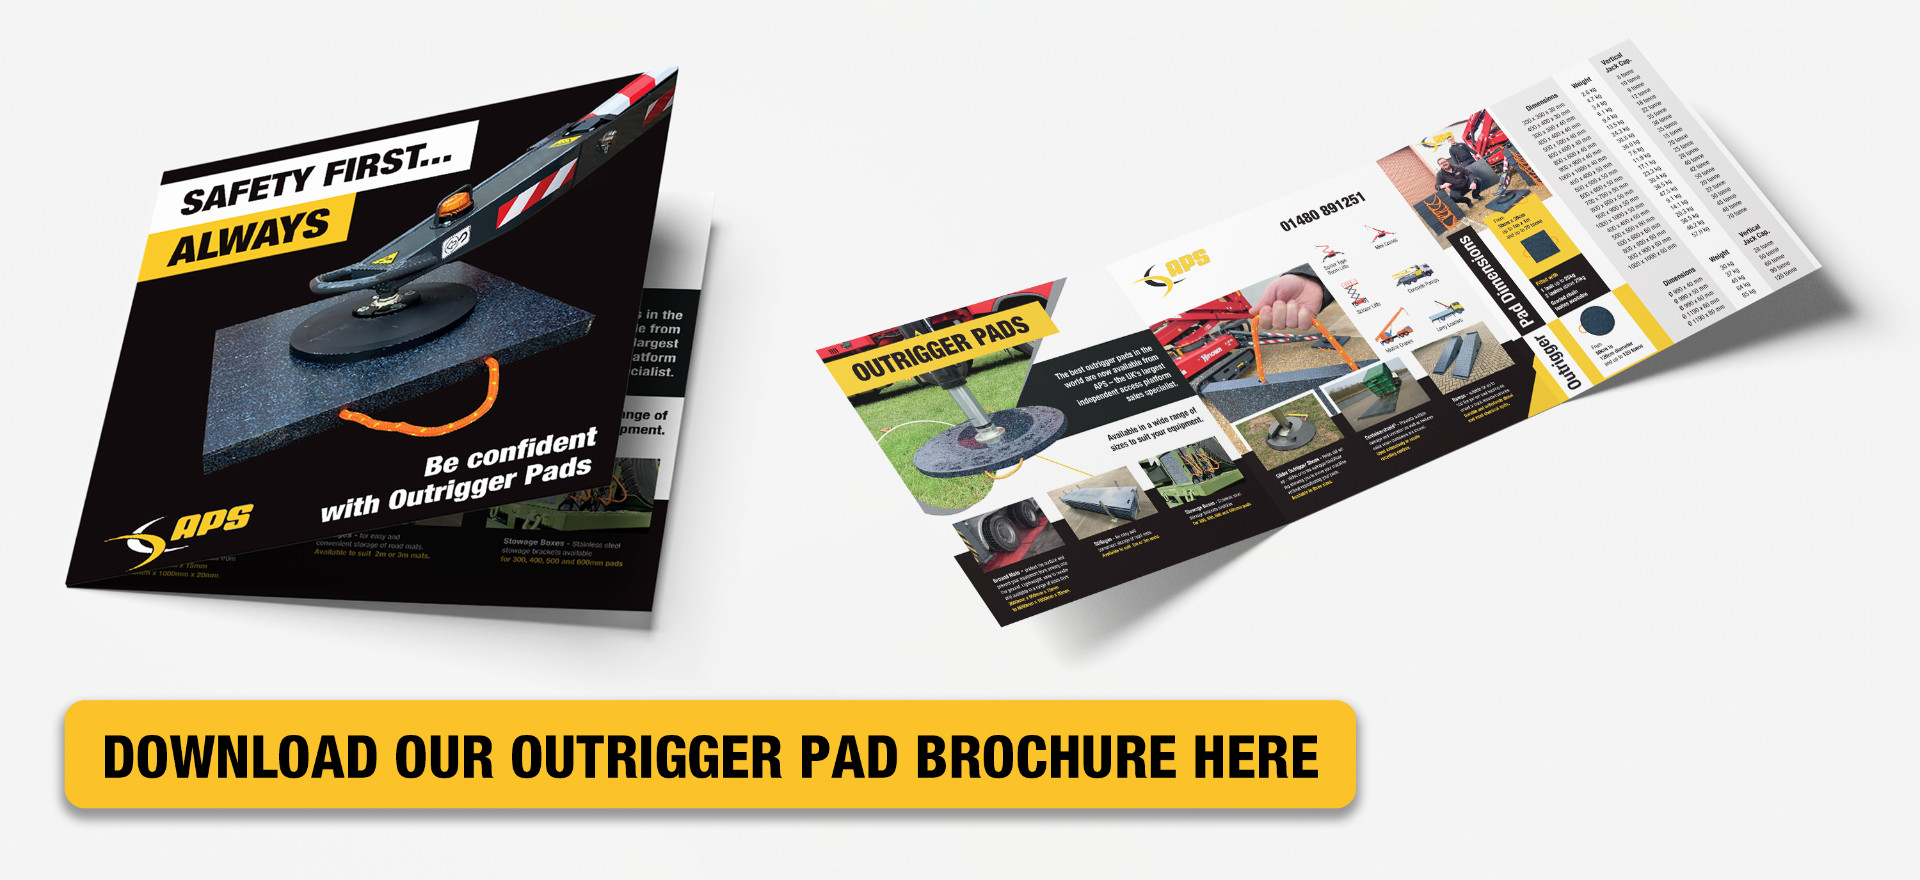 Download our Outrigger Pad brochure here